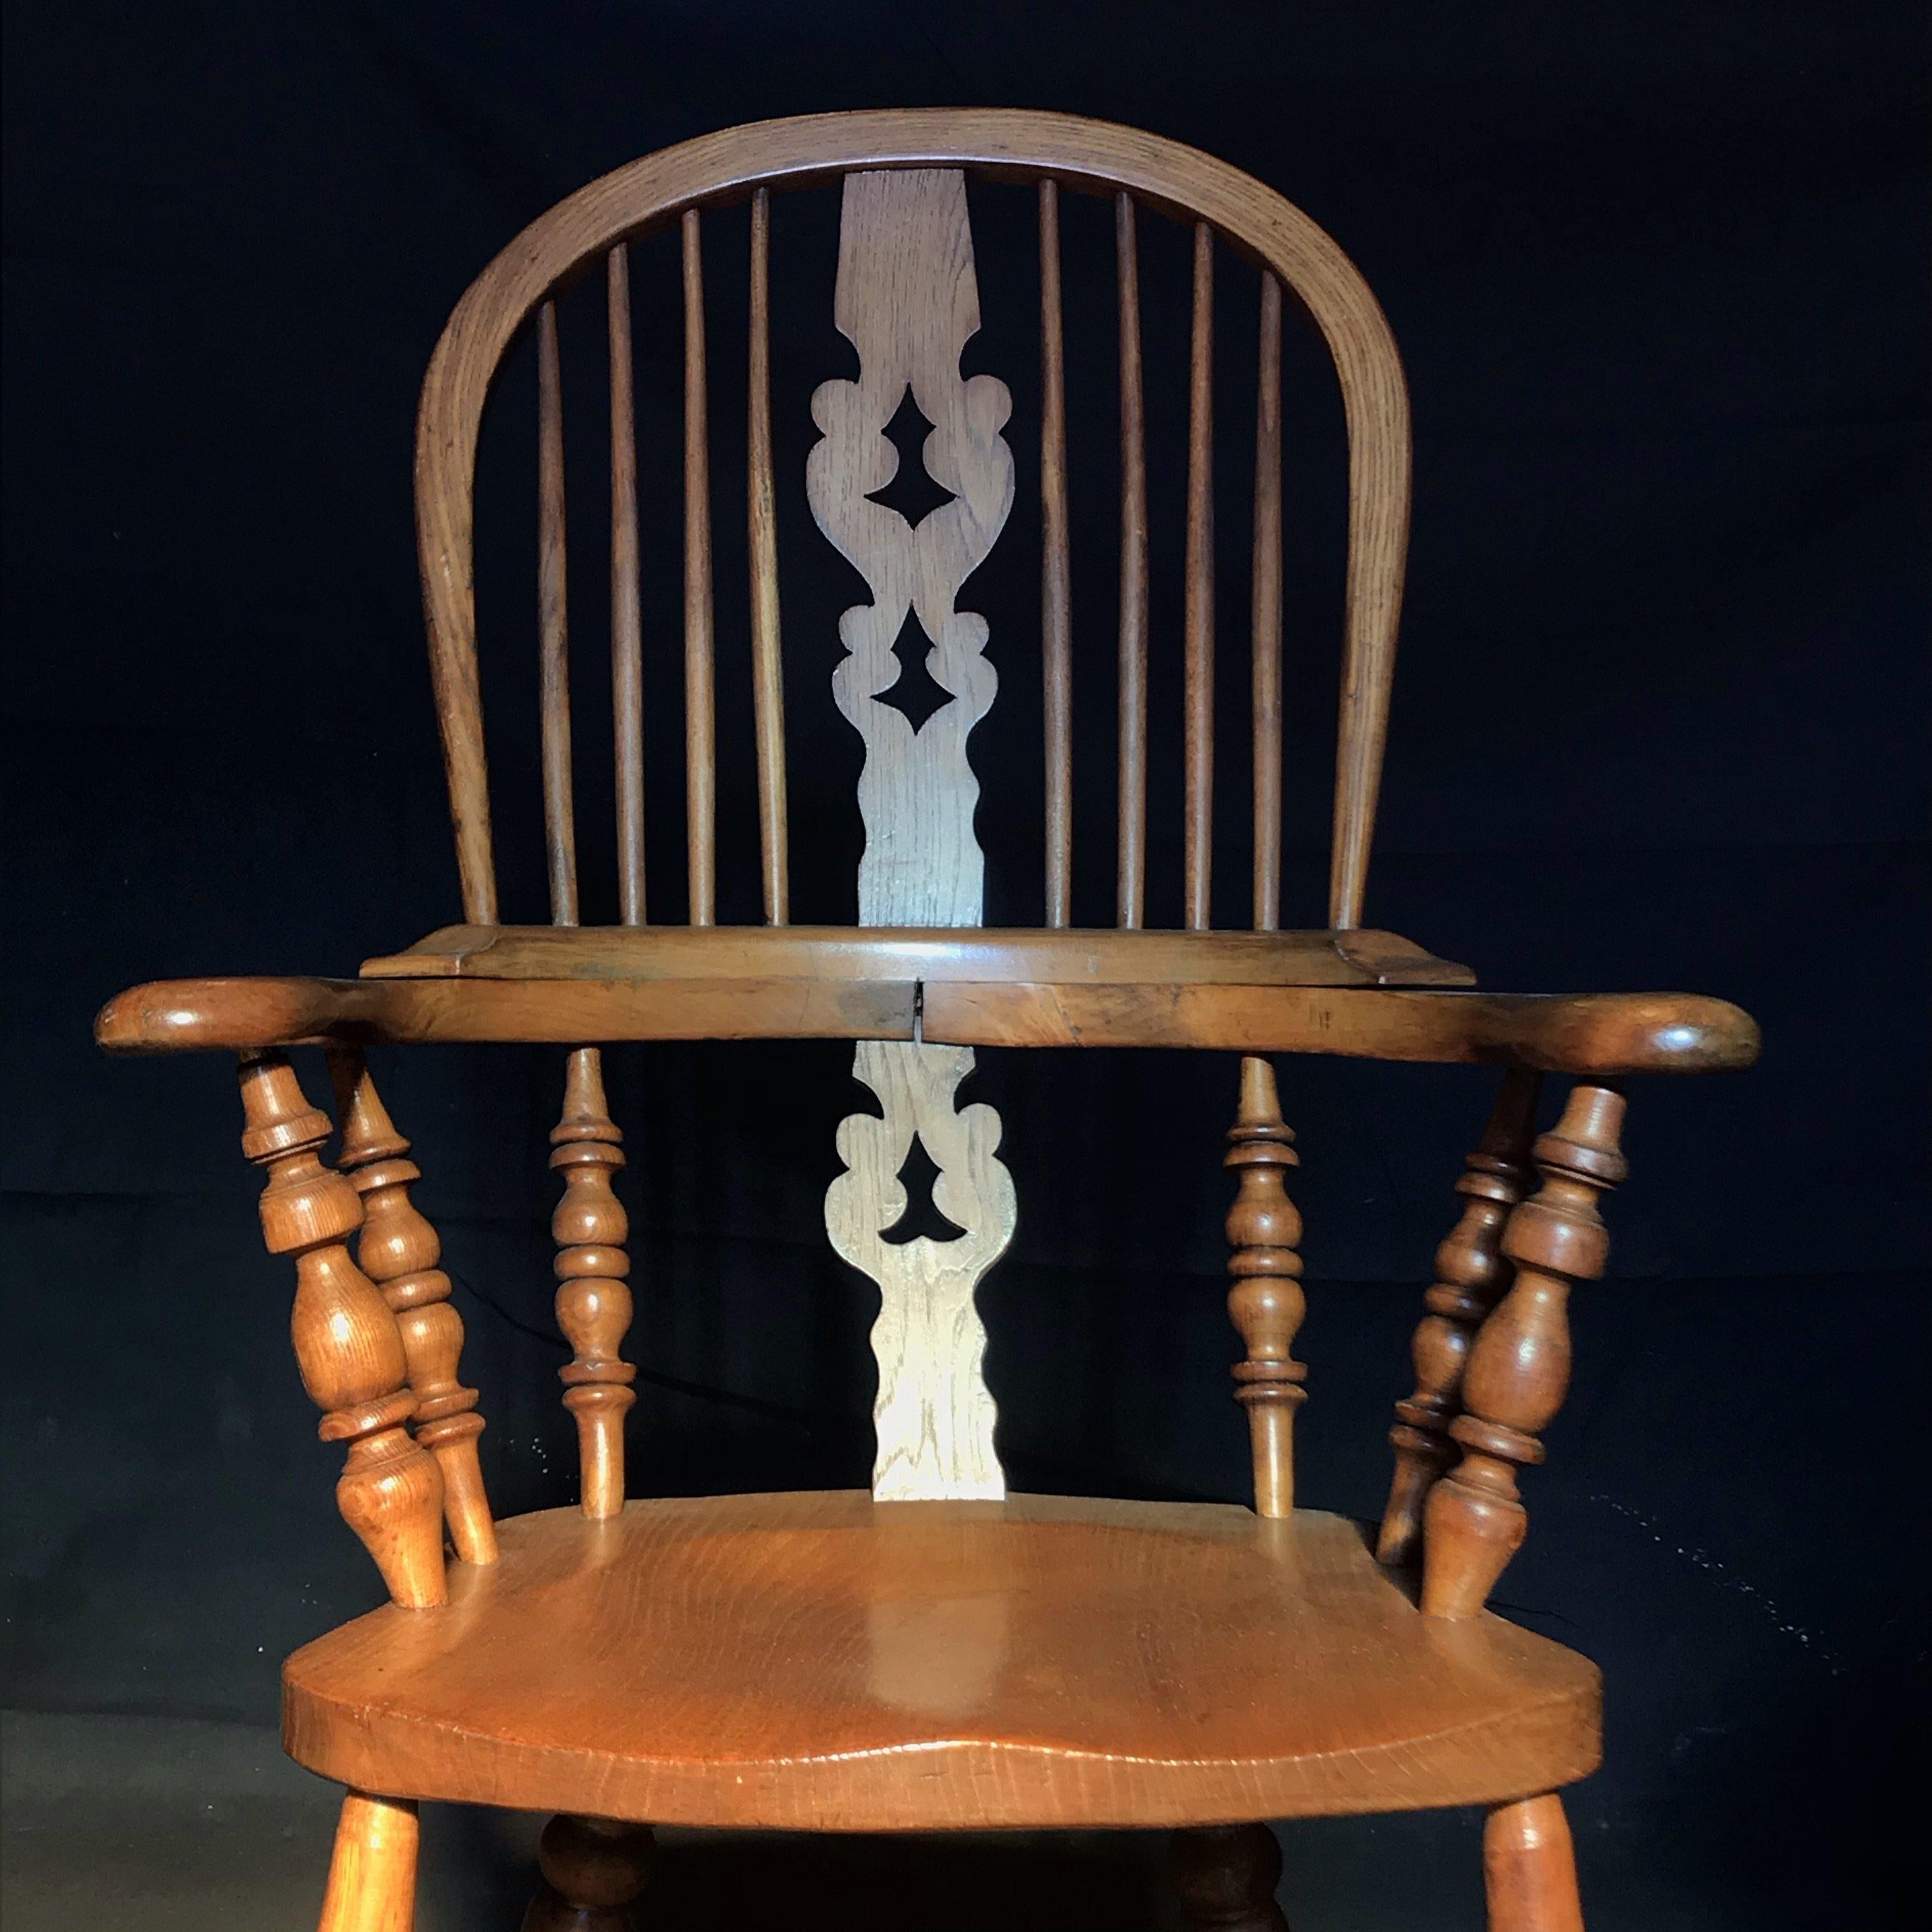 Early 20th century Windsor walnut armchair with turned legs and stretcher, well figured and very comfortable. The Windsor chair is established as one of the great classics of English country furniture. Made by village craftsmen to traditional